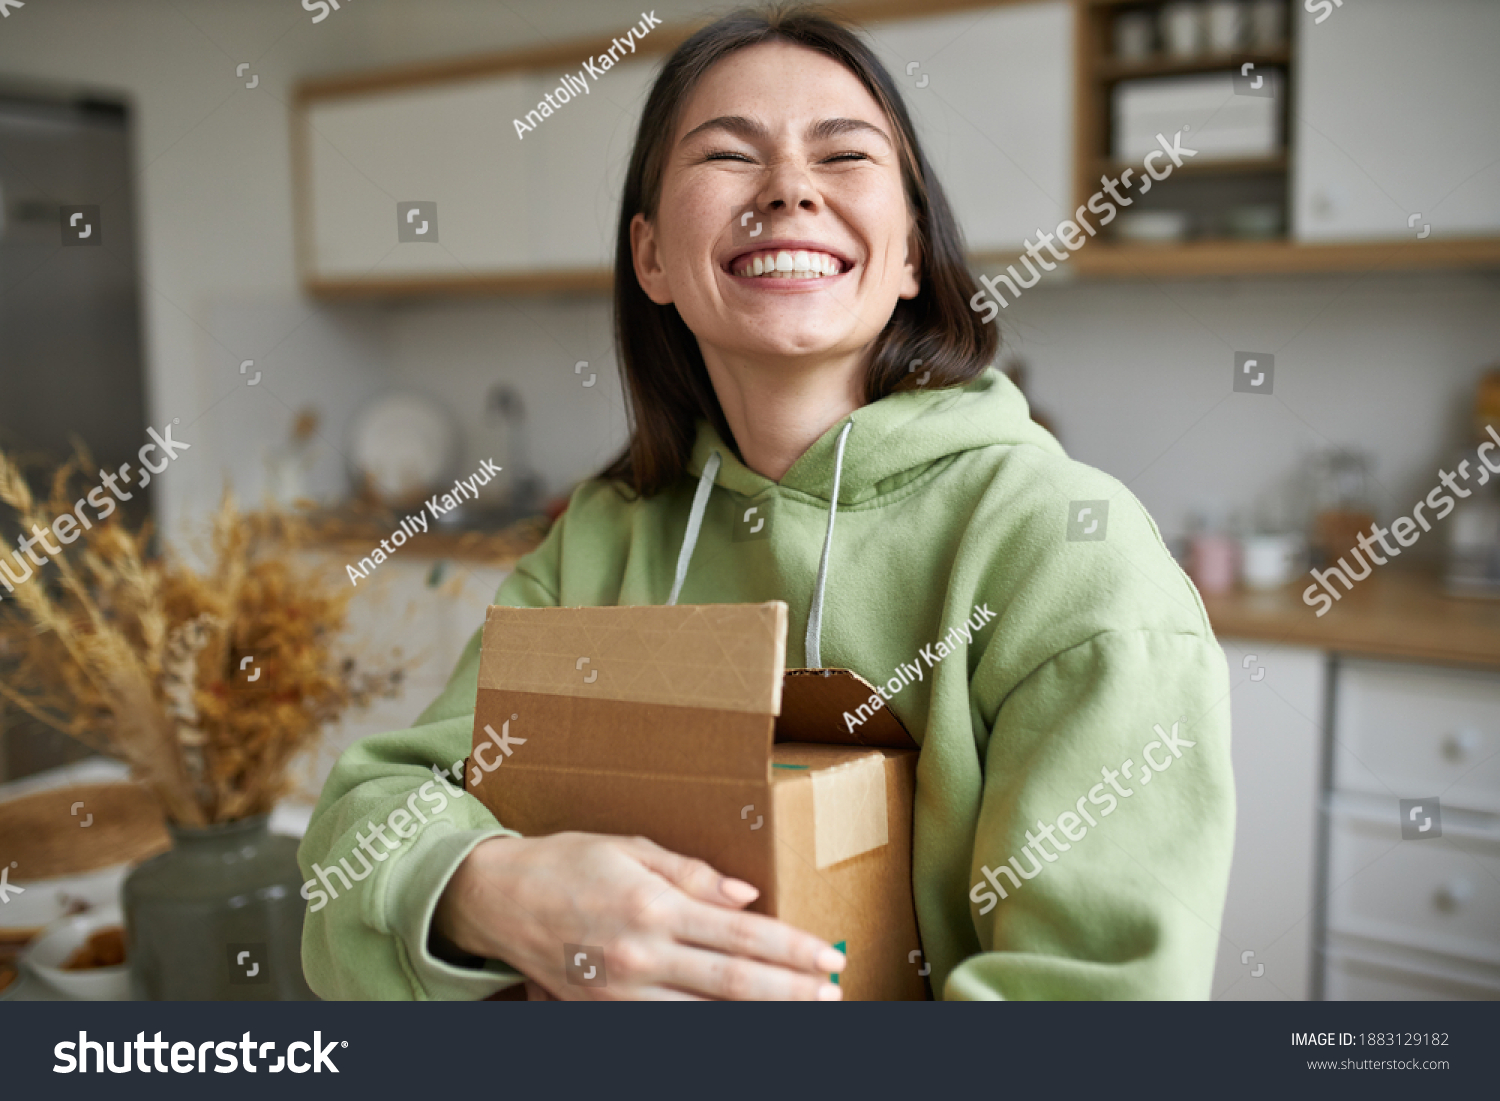 Cheerful teenage girl expressing positive emotions receiving unexpected birthday gift holding parcel and smiling with pleasure. Dark haired young woman posing with cardboard box with new cosmetics #1883129182